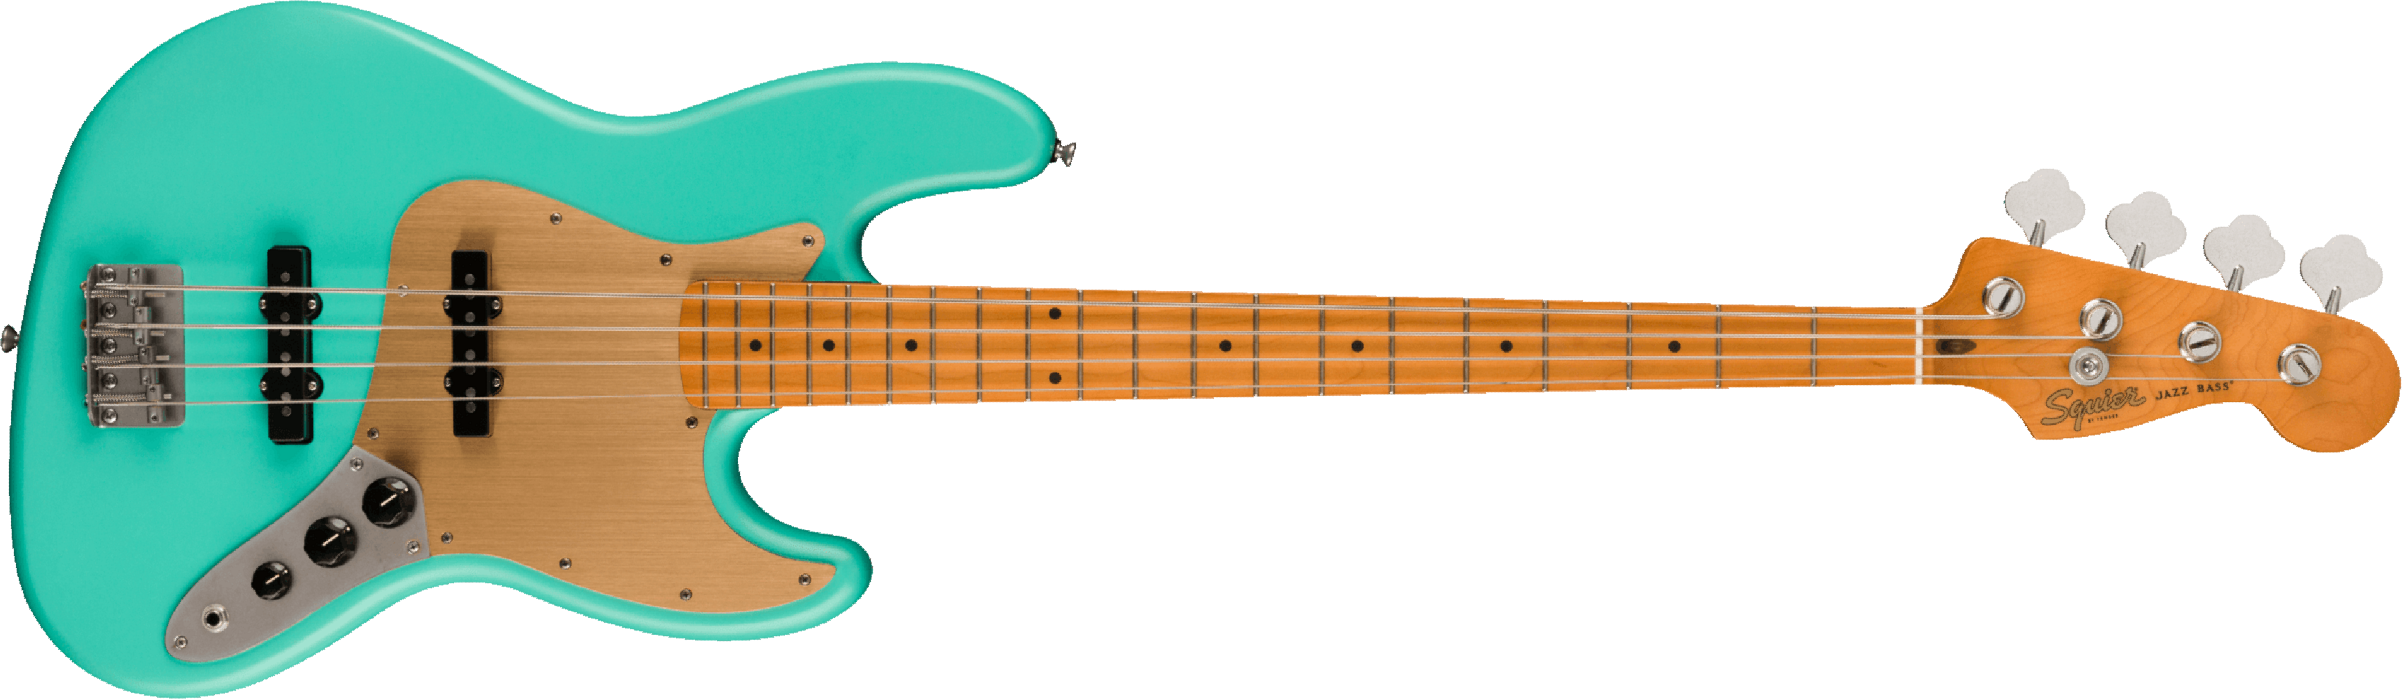 Squier Jazz Bass 40th Anniversary Gold Edition Mn - Satin Seafoam Green - Basse Électrique Solid Body - Main picture